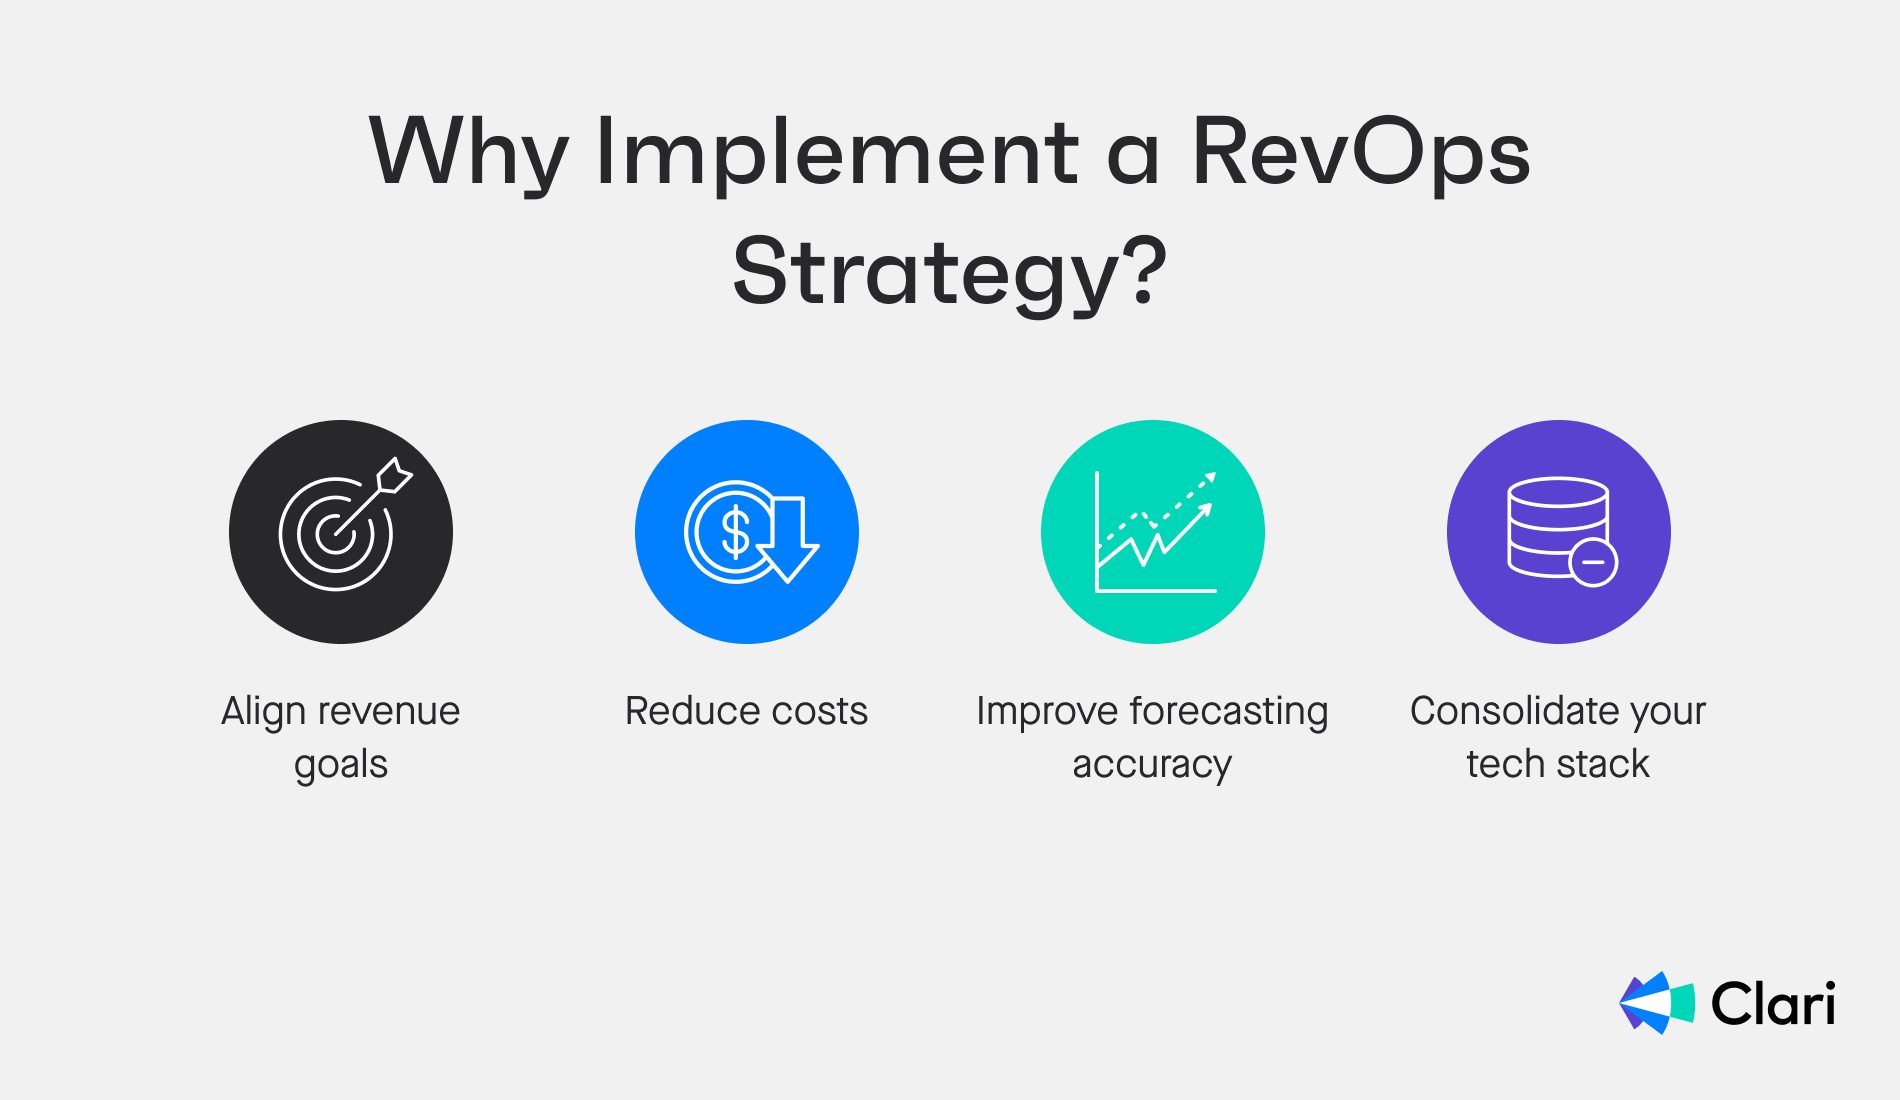 Image with the reasons to implement a RevOps strategy